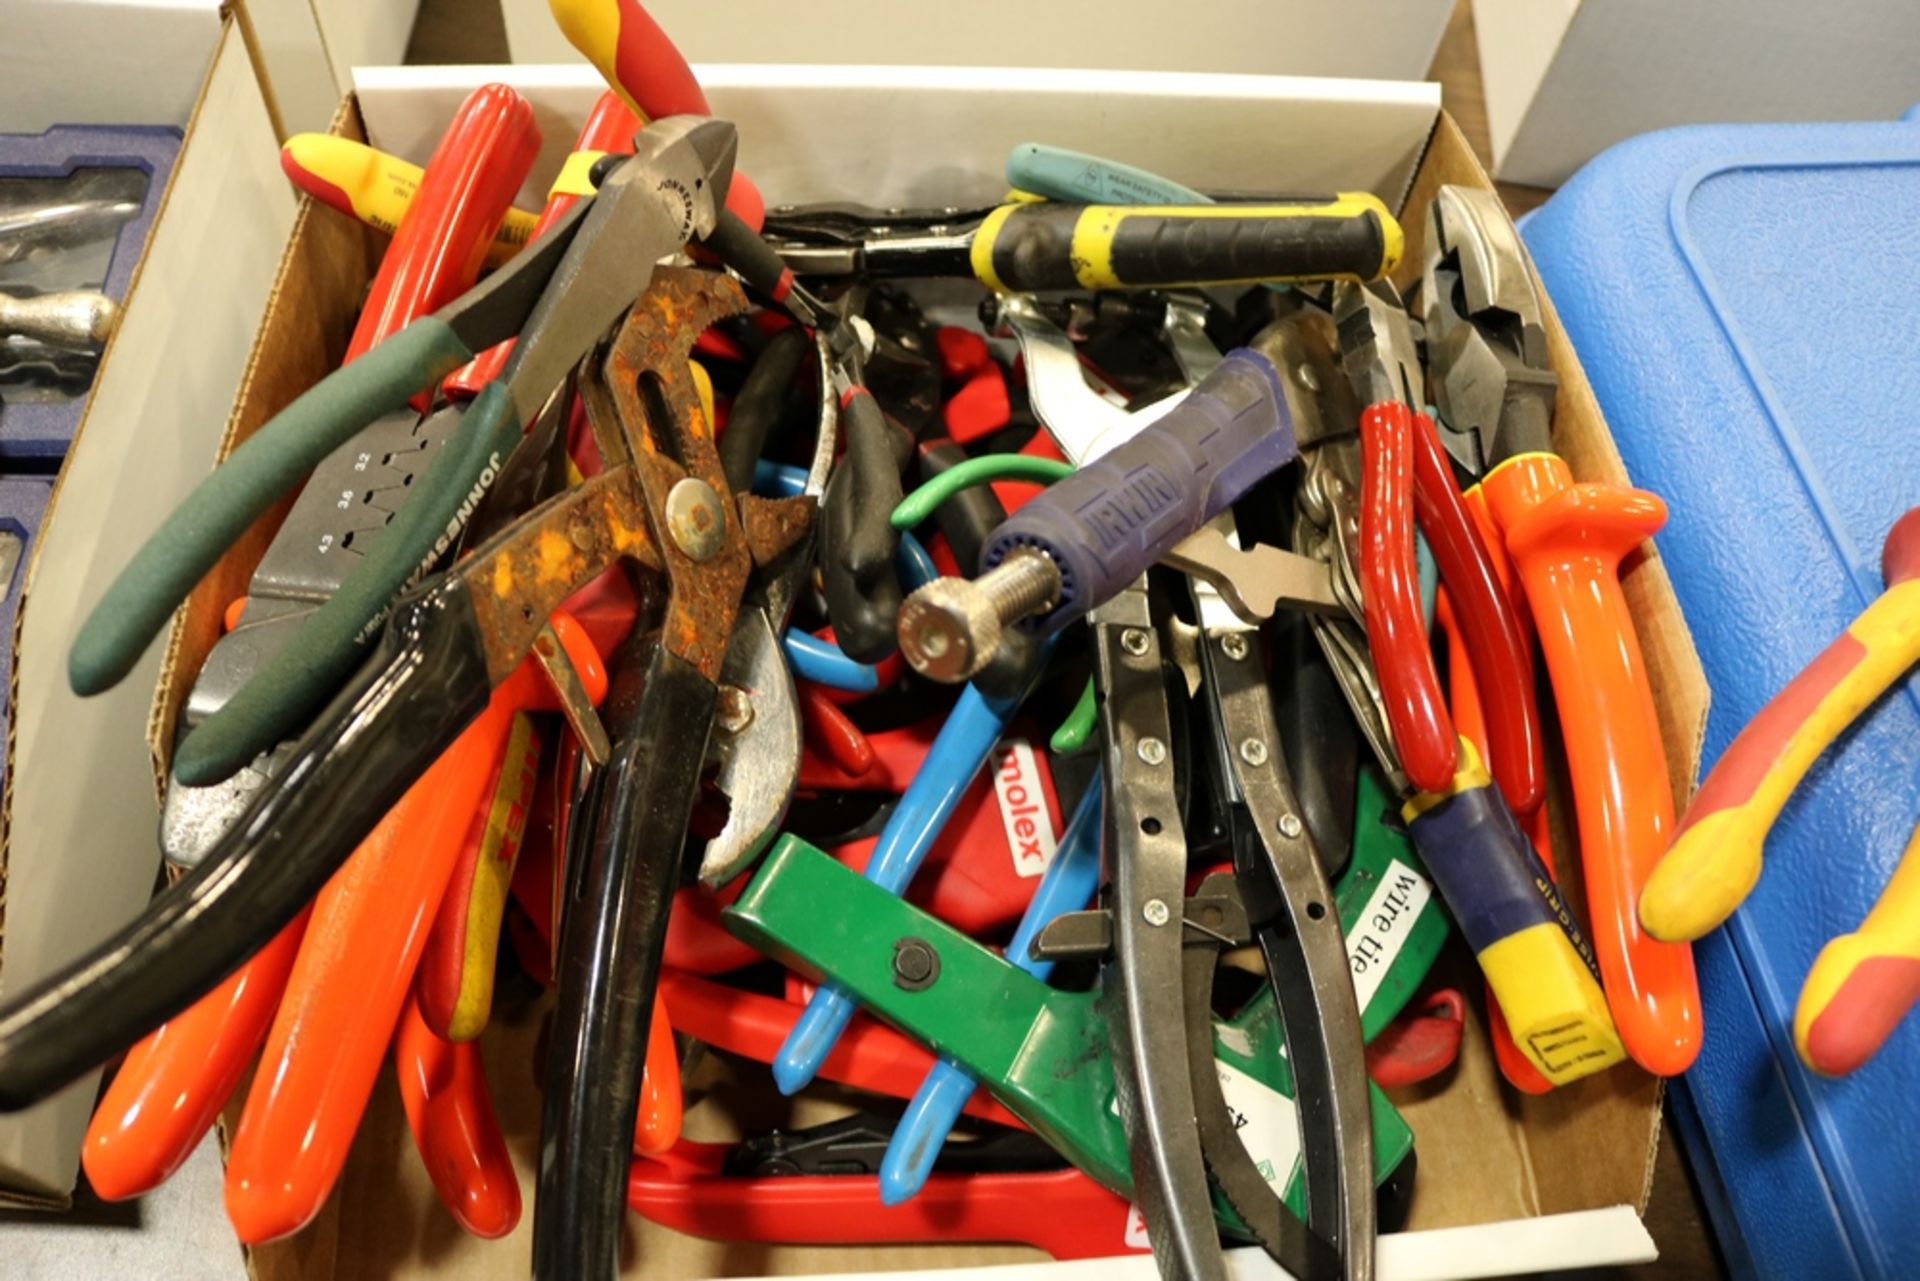 Box of Various Hand Tools Basic & Electrical - Image 3 of 3